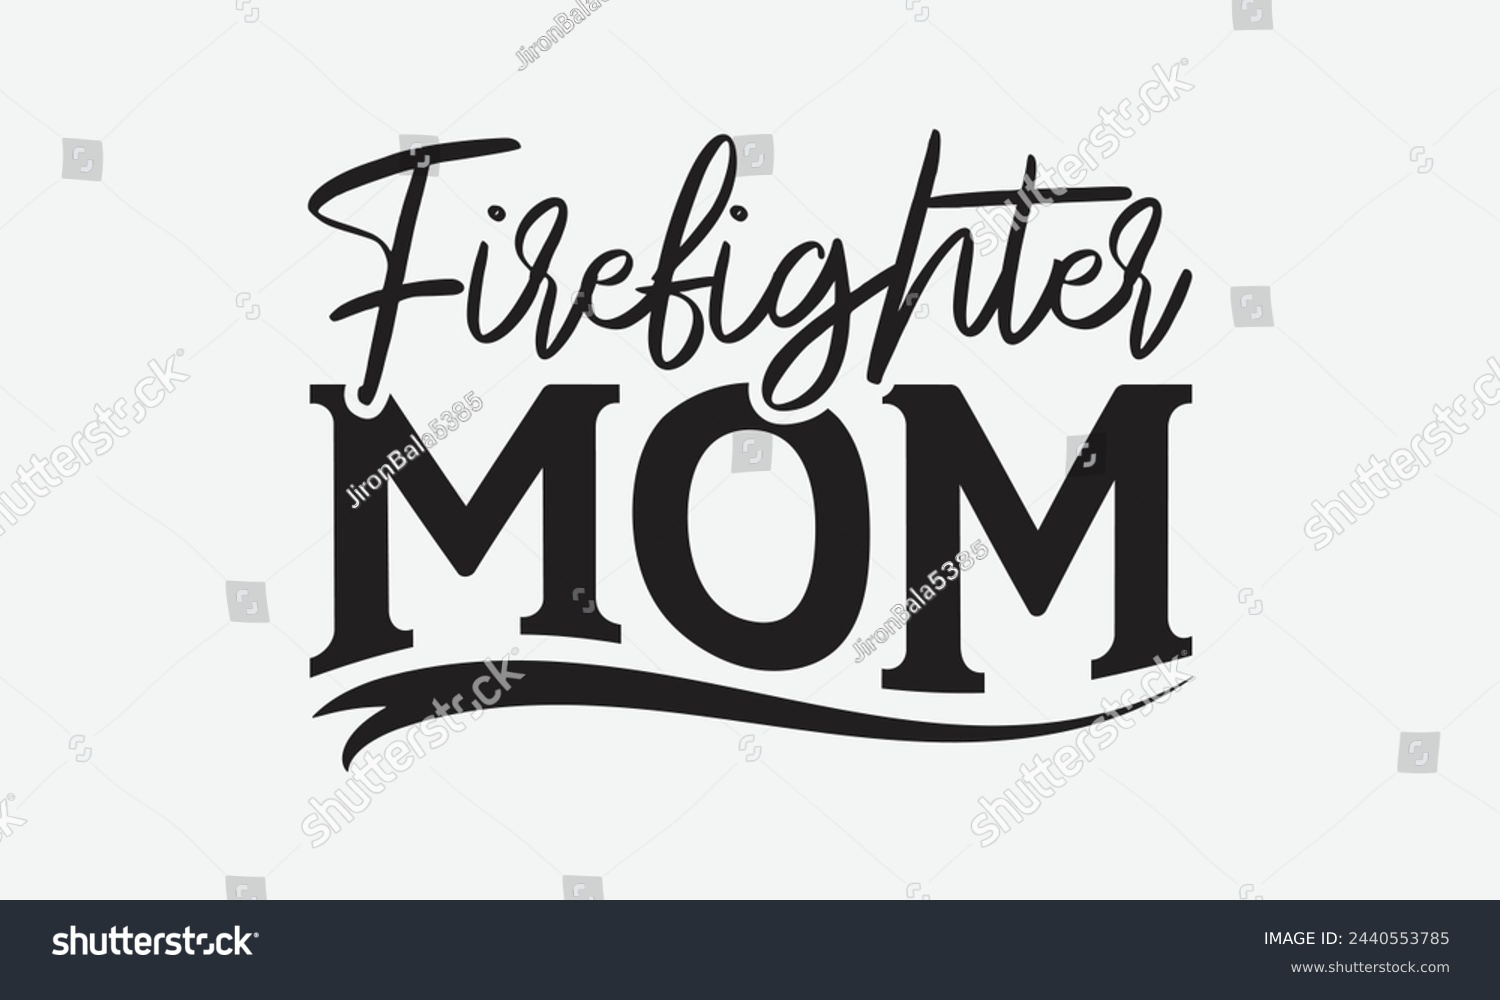 SVG of Firefighter Mom - Mom t-shirt design, isolated on white background, this illustration can be used as a print on t-shirts and bags, cover book, template, stationary or as a poster. svg